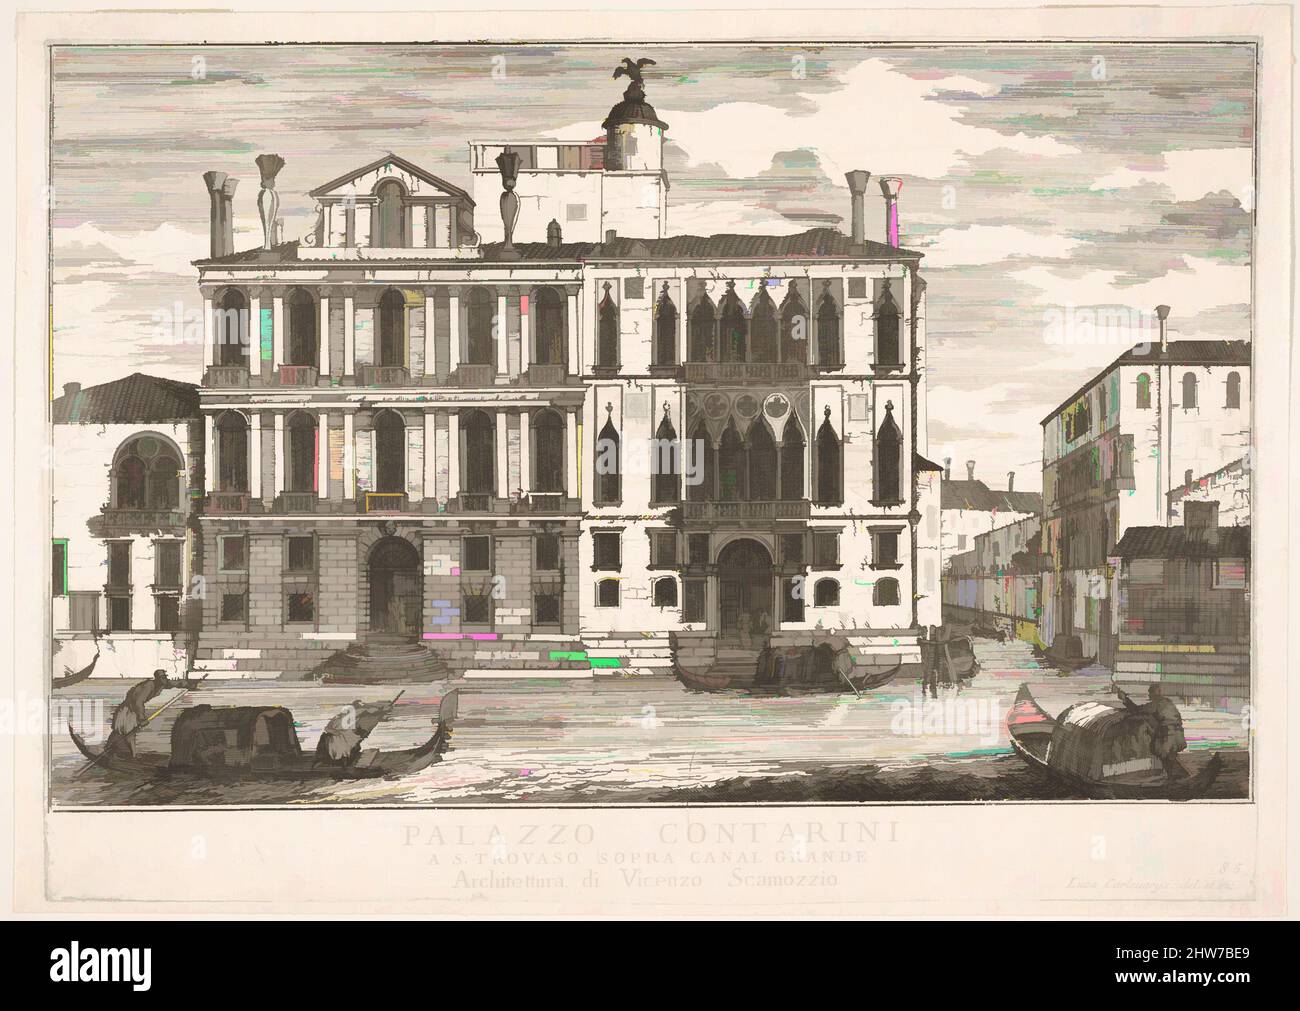 Art inspired by Plate 85: View of the Contarini Palace in Campo San Trovaso, Venice, 1703, from the series 'The buildings and views of Venice' (Le fabriche e vedute di Venezia), 1703, Etching, plate: 8 1/4 x 11 5/8 in. (21 x 29.5 cm), Luca Carlevaris (Italian, Udine 1663/65–1730 Venice, Classic works modernized by Artotop with a splash of modernity. Shapes, color and value, eye-catching visual impact on art. Emotions through freedom of artworks in a contemporary way. A timeless message pursuing a wildly creative new direction. Artists turning to the digital medium and creating the Artotop NFT Stock Photo